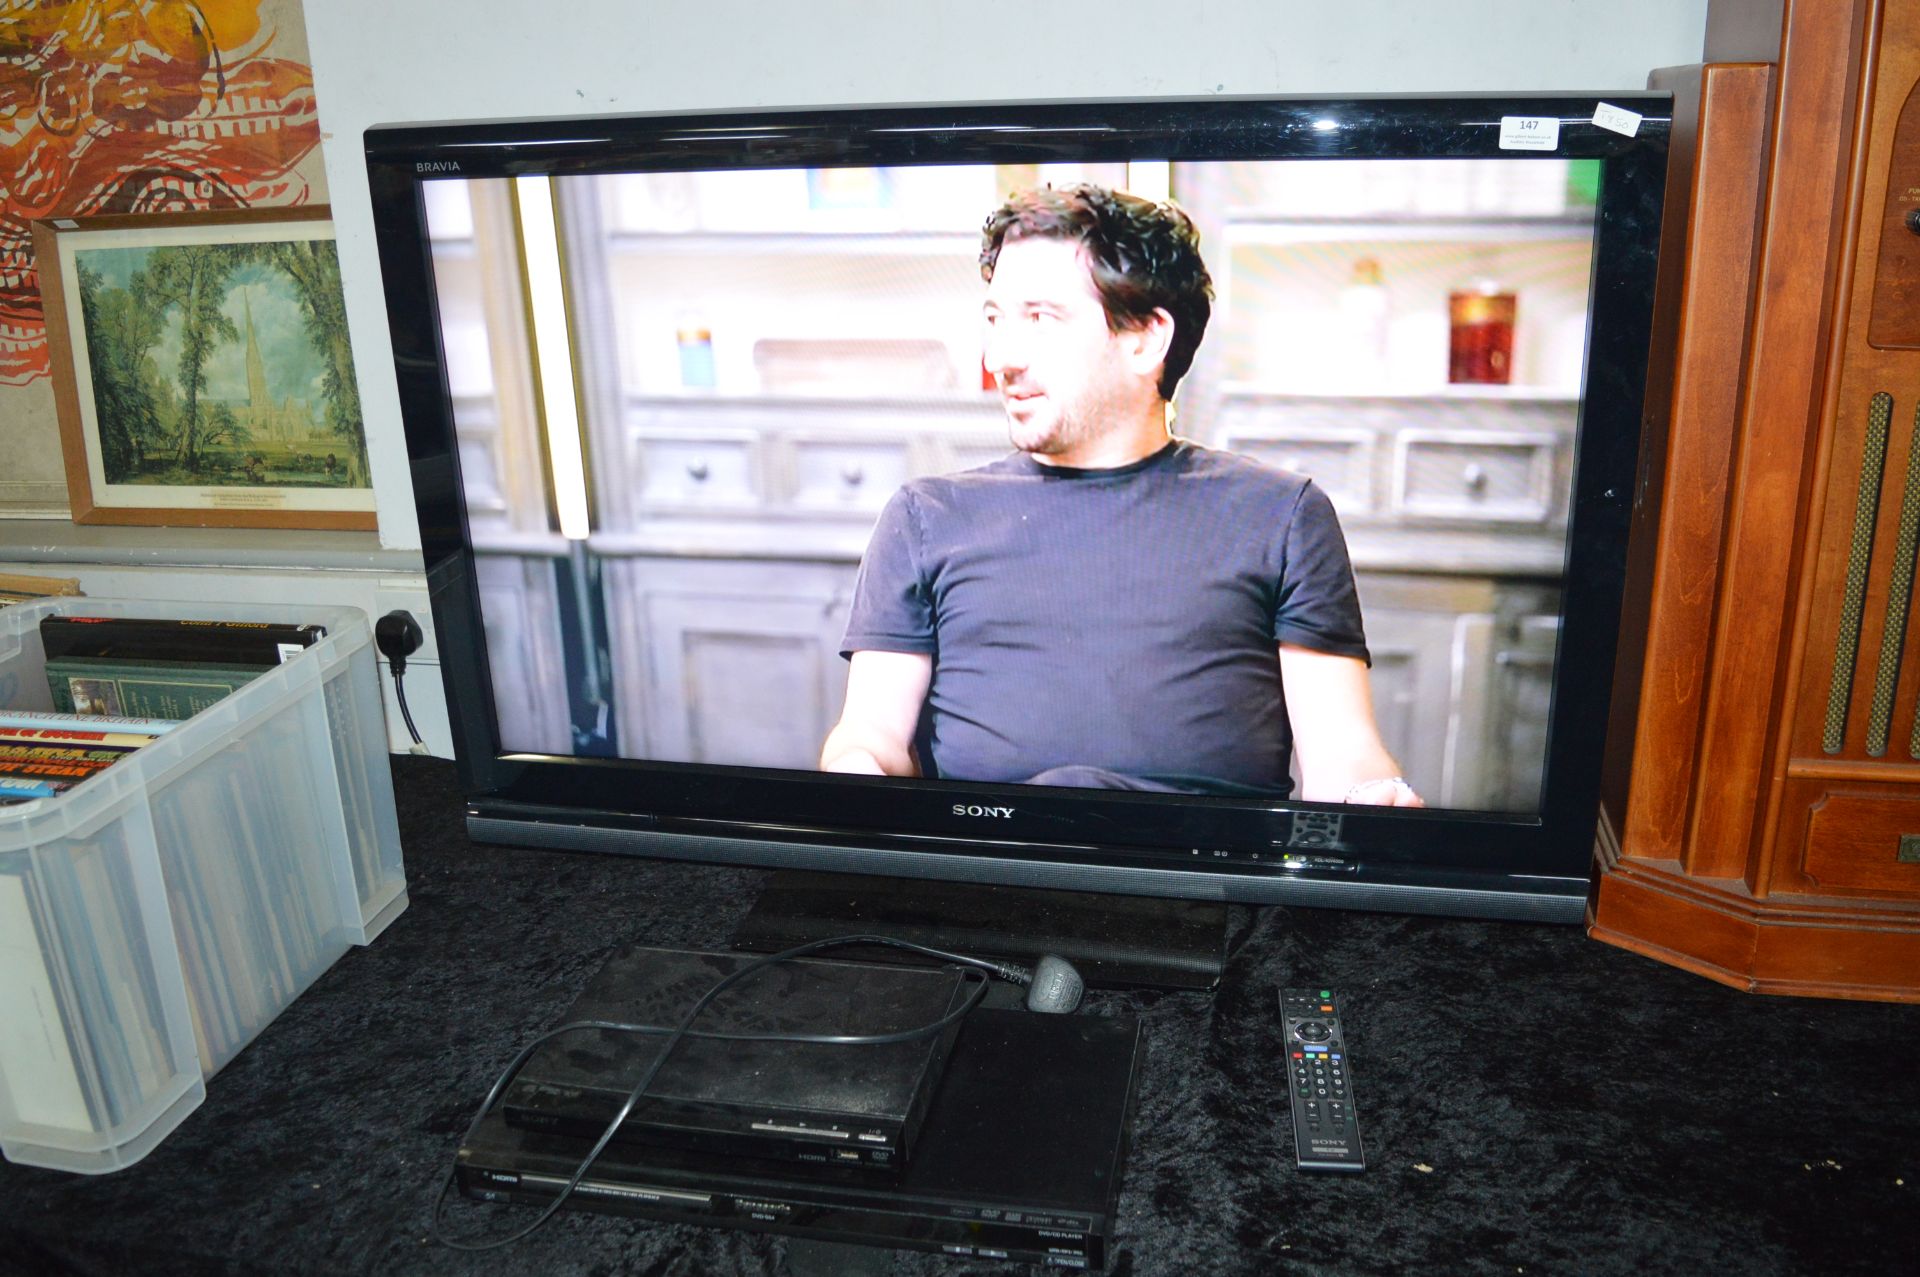 Sony Bravia 40" TV (working condition with remote)